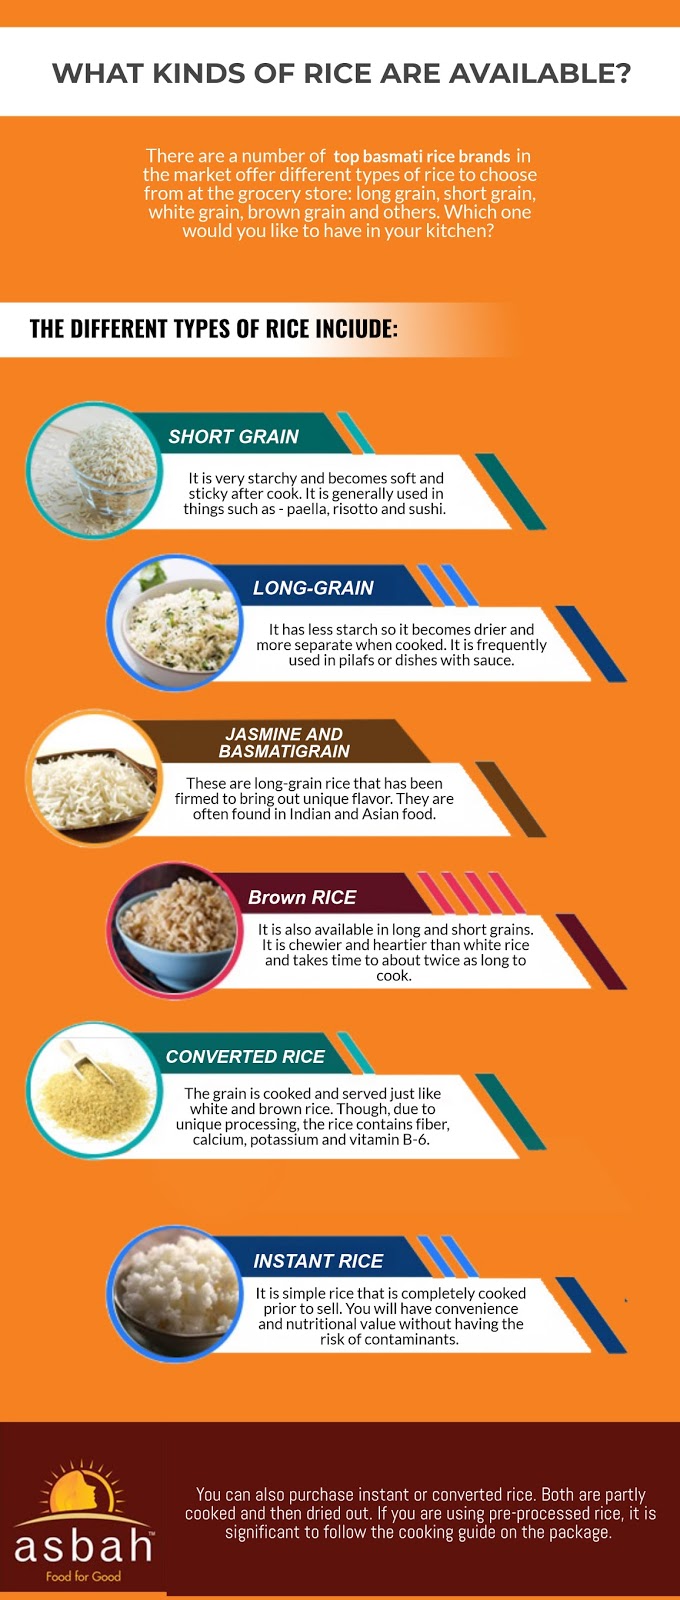 https://create.piktochart.com/output/27765664-what-kinds-of-rice-are-available